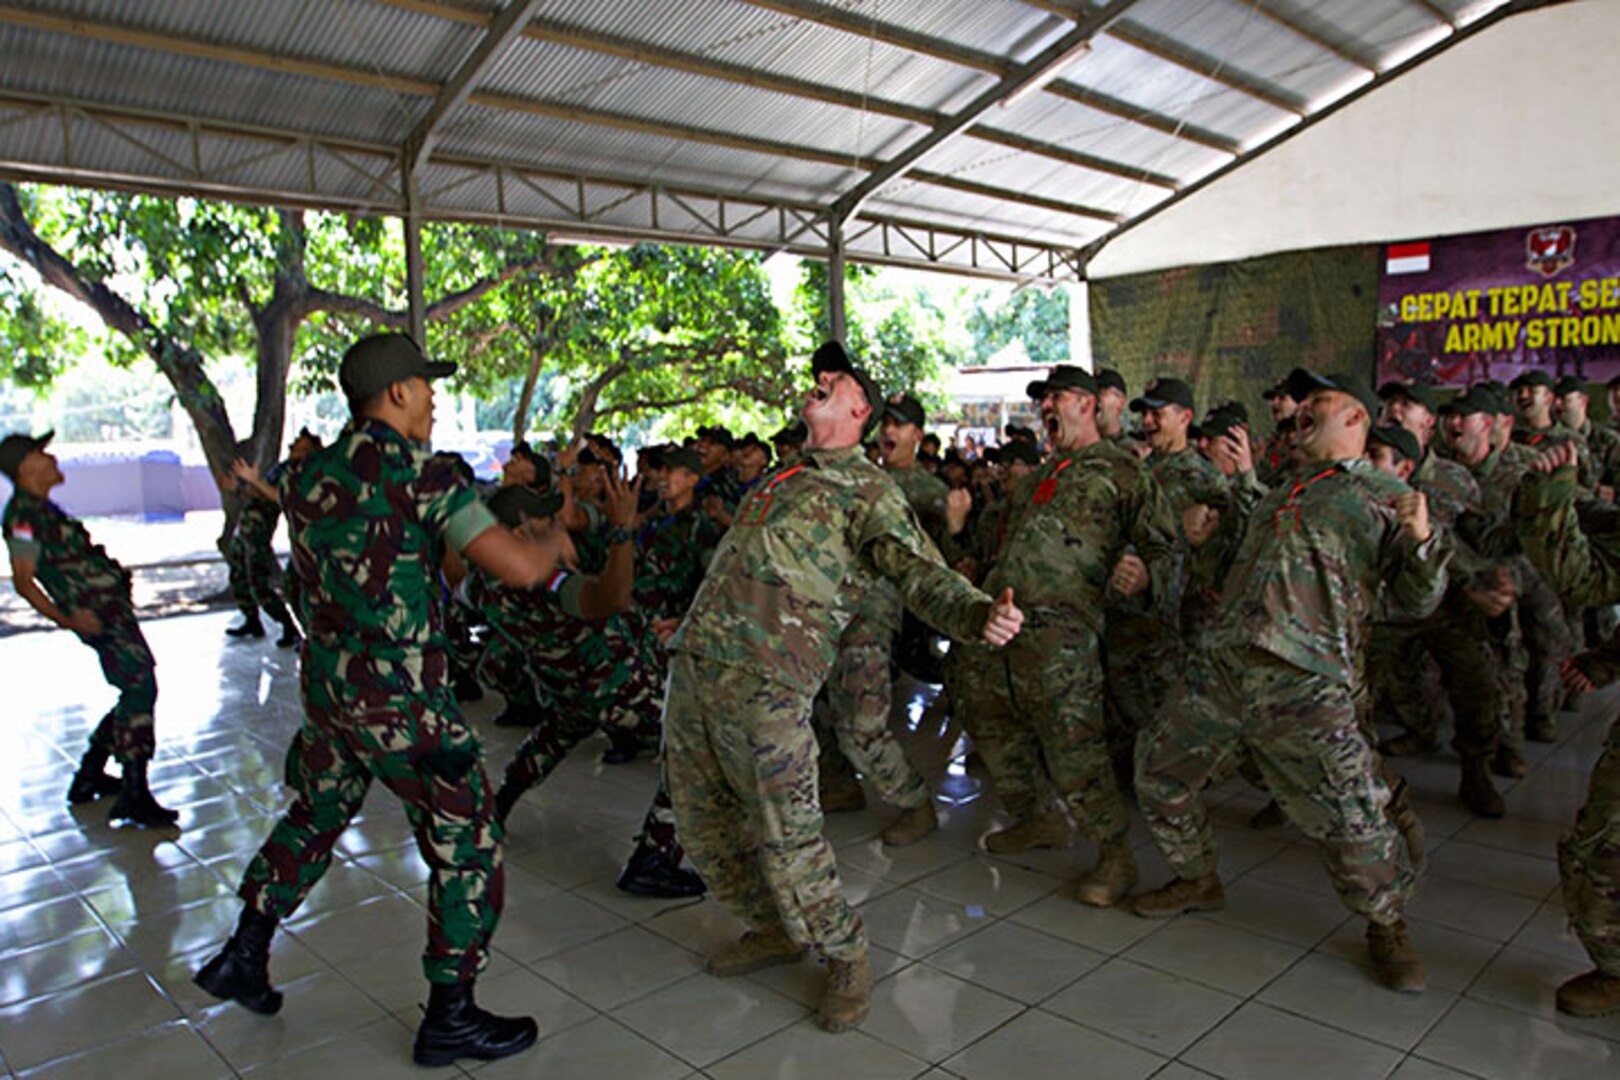 Soldiers with the Indiana Army National Guard's 76th Infantry Brigade Combat Team and their Indonesian counterparts from the Tentara Nasional Indonesia army kick off Garuda Shield 18 by conducting a "Yel-Yel," a cry-and-response war dance, July 29, 2018, in Indonesia. Garuda Shield 18 is the third exercise in U.S. Army Pacific's second iteration of Pacific Pathways, a series of multinational engagements with ally and partner militaries in the Indo-Pacific region.